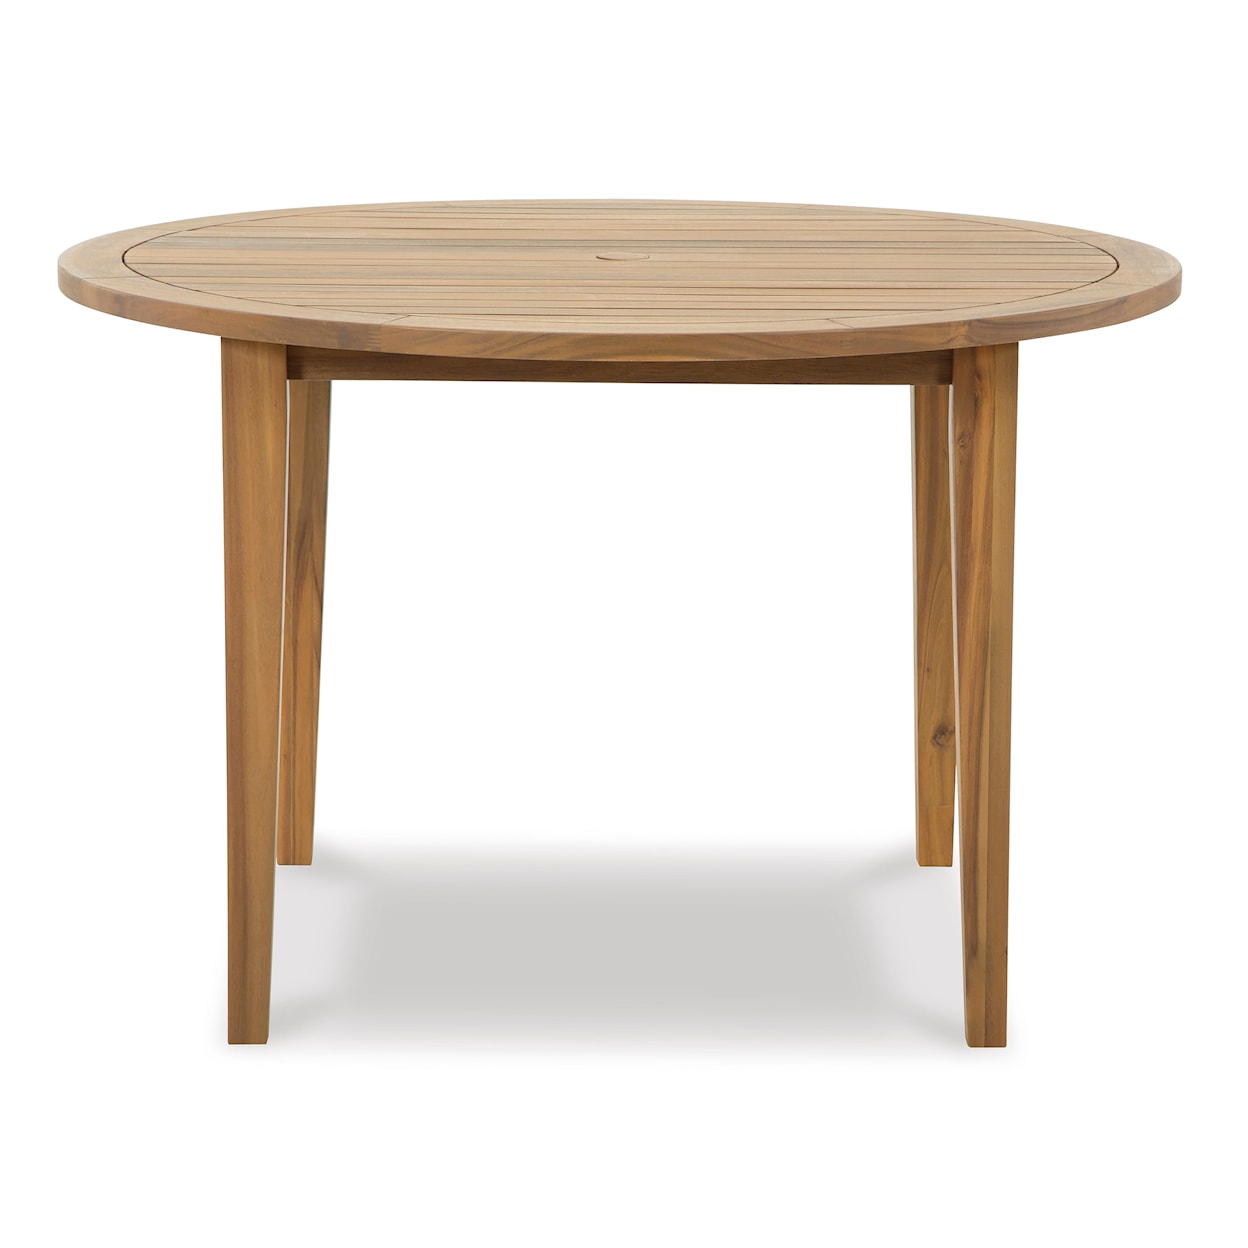 Signature Janiyah Outdoor Dining Table